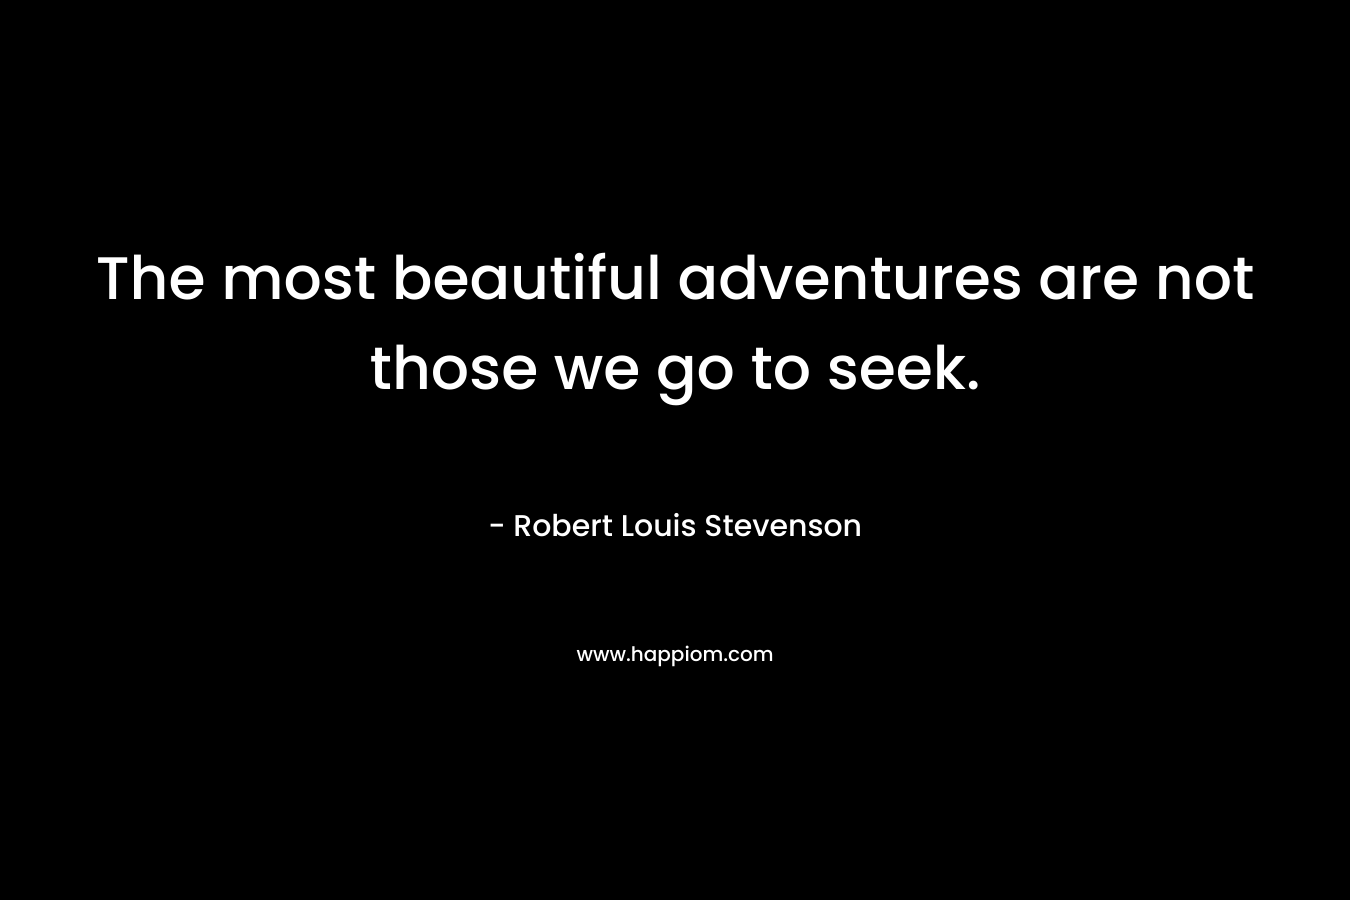 The most beautiful adventures are not those we go to seek. – Robert Louis Stevenson